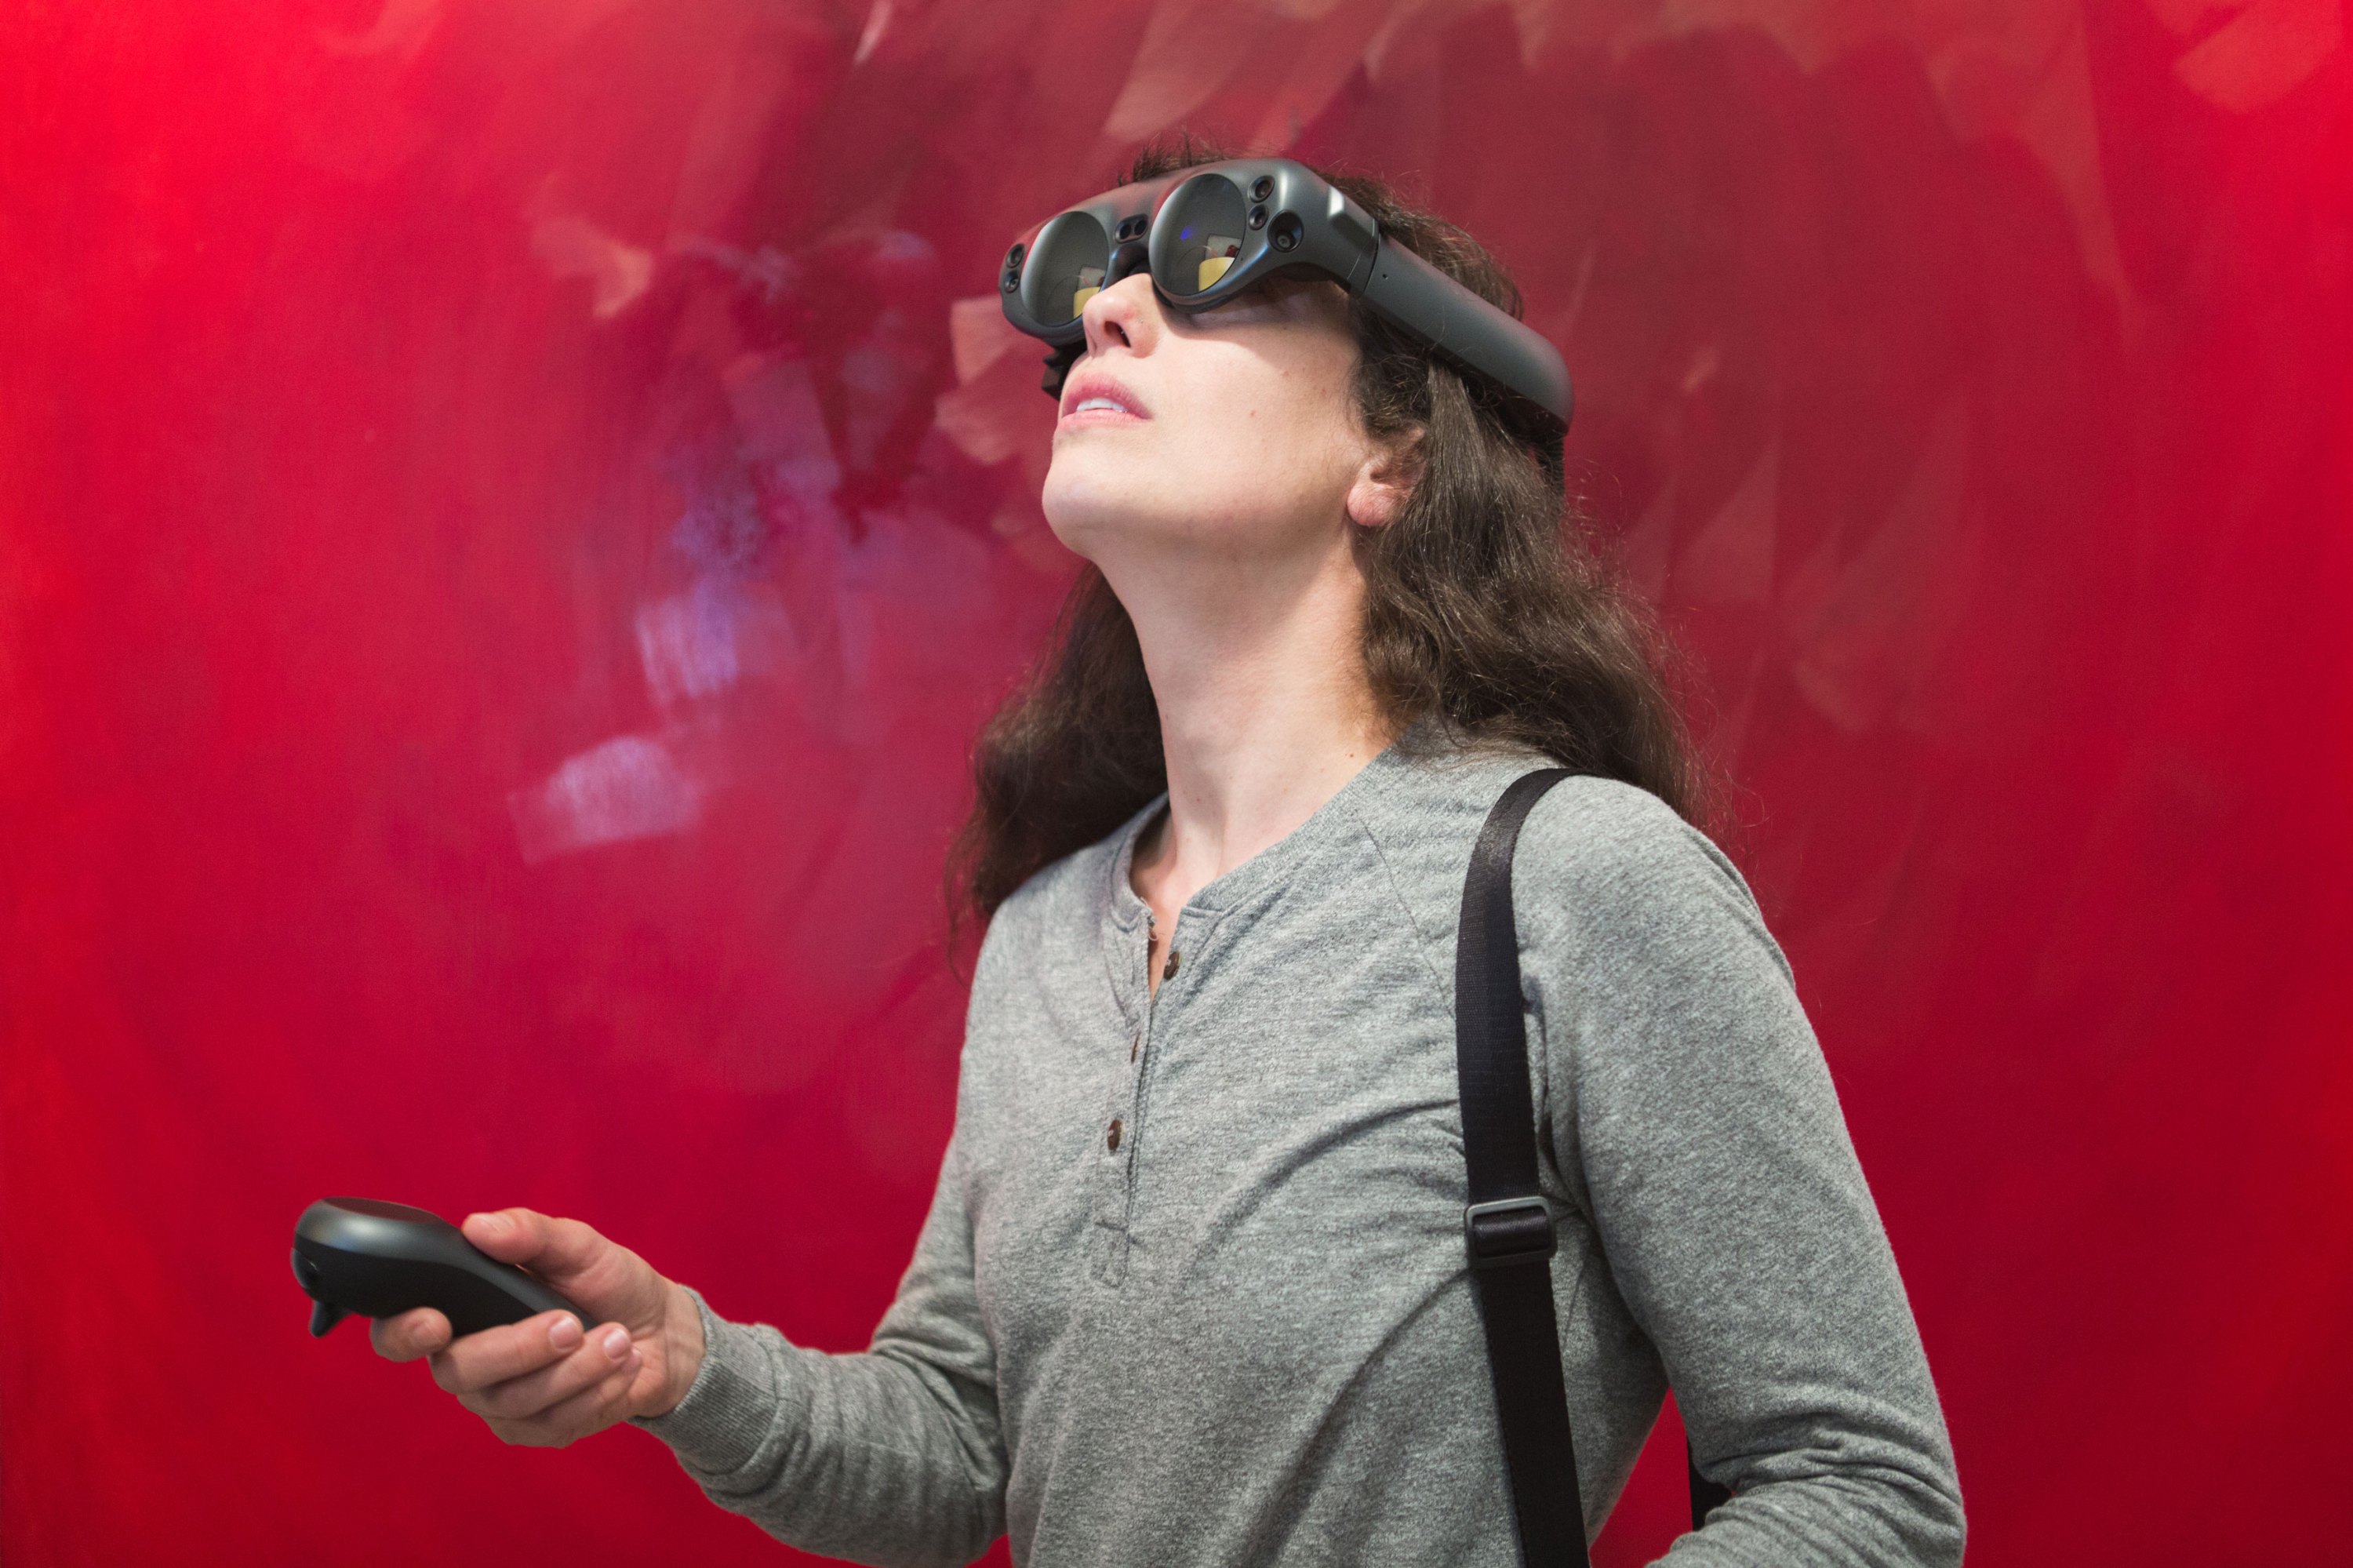 Magic Leap's headset is real, but be enough MIT Technology Review